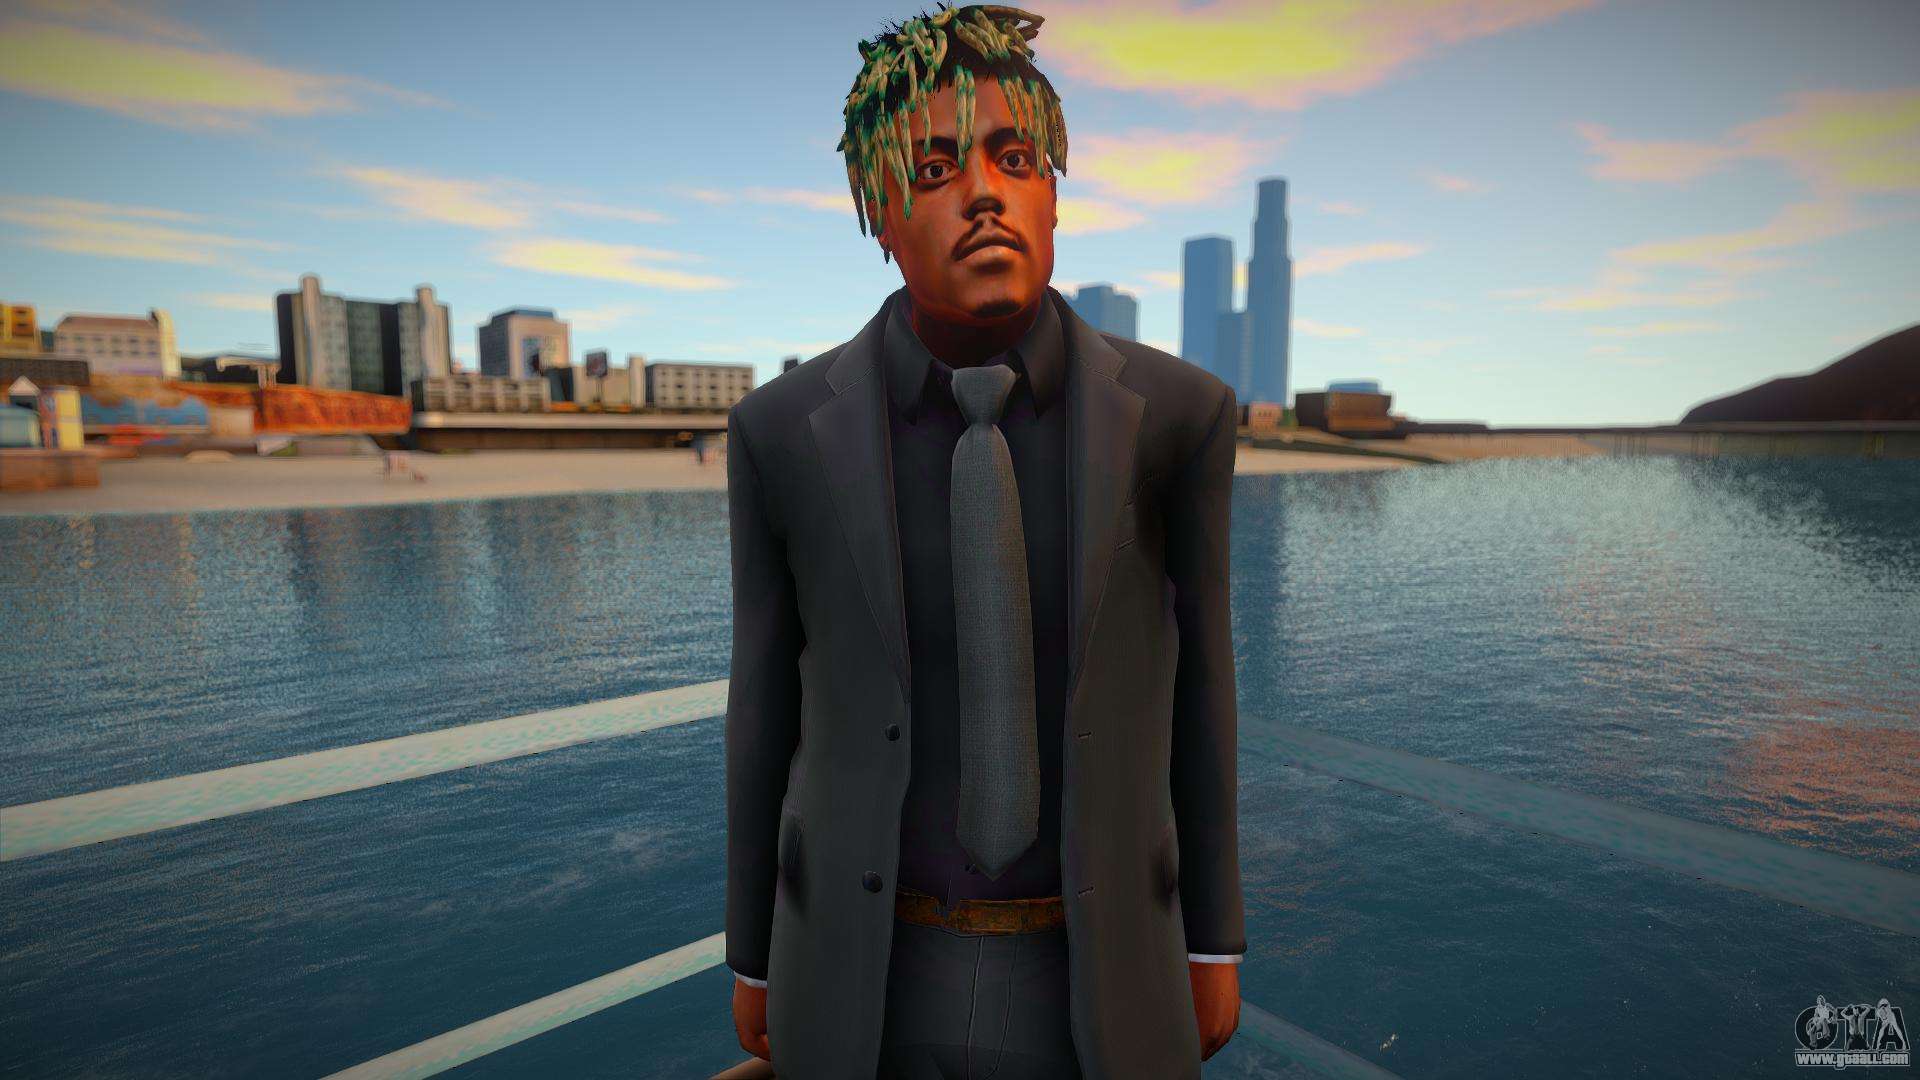 I made Juice's outfit from the Cigarettes visualizer in gta. : r/JuiceWRLD